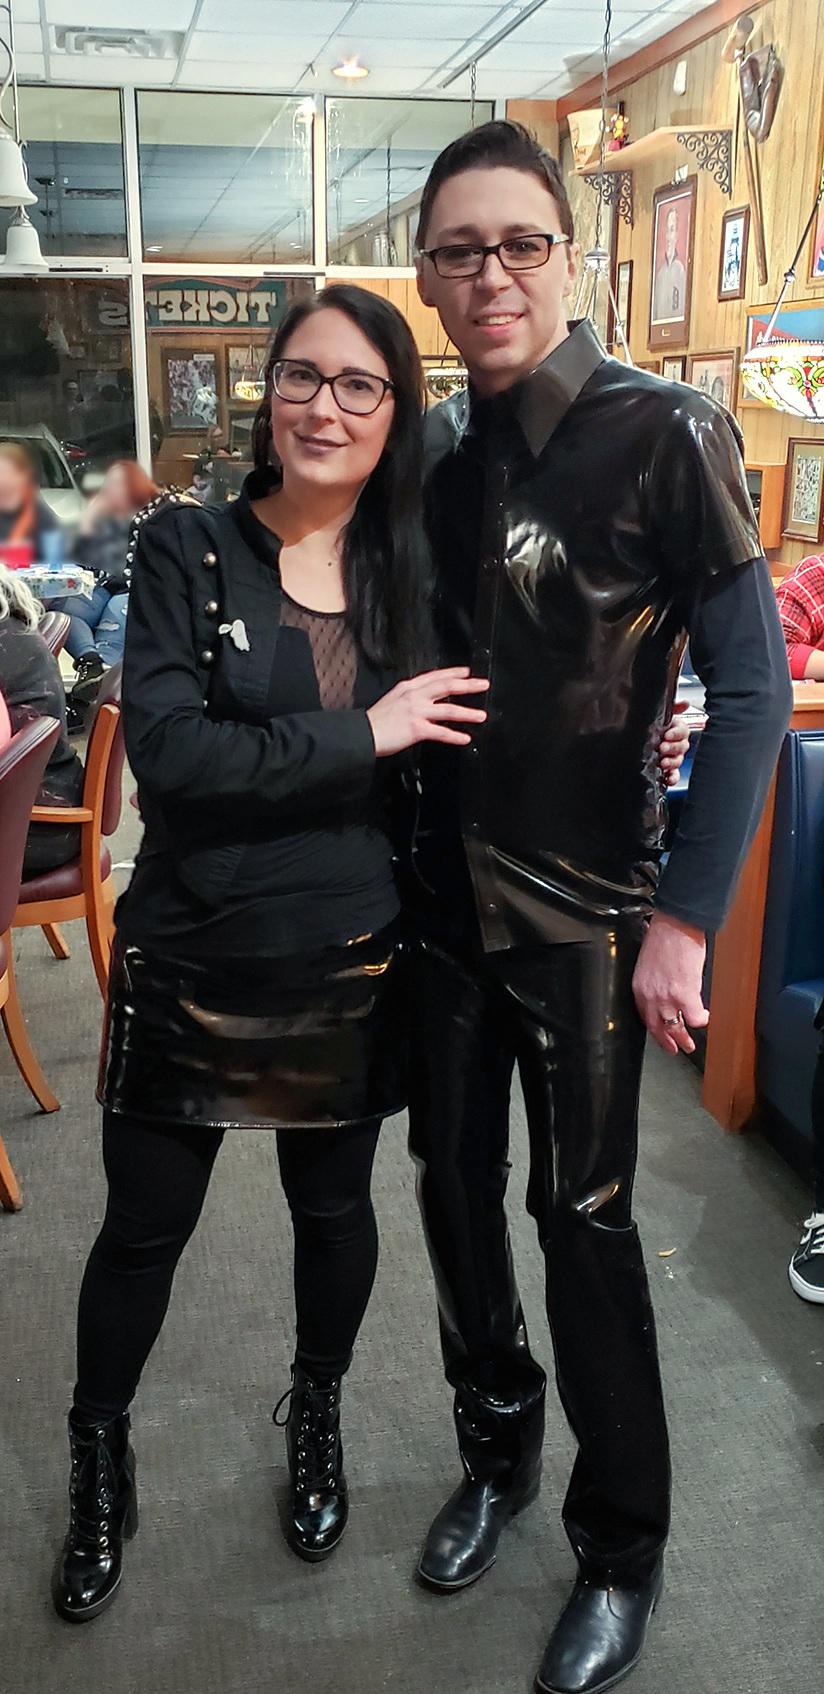 Shiny In Public (OC) Me And My Lovely Wife Shining Up The Place!